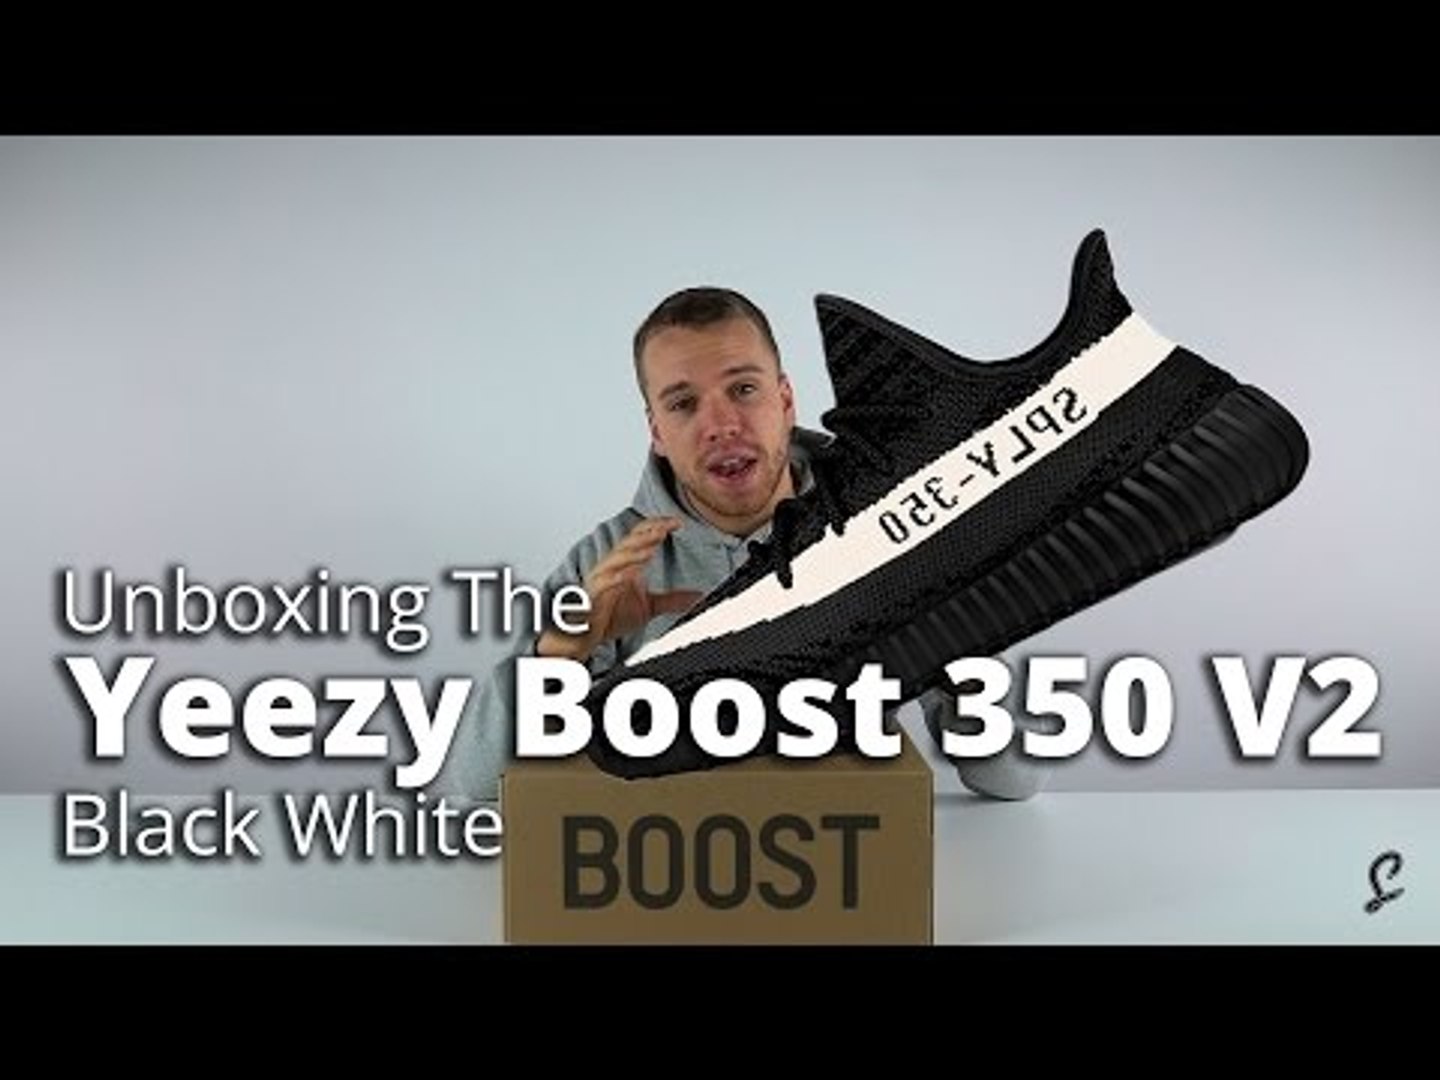 Yeezy Boost 350 V2 Black White Review / Unboxing - video Dailymotion